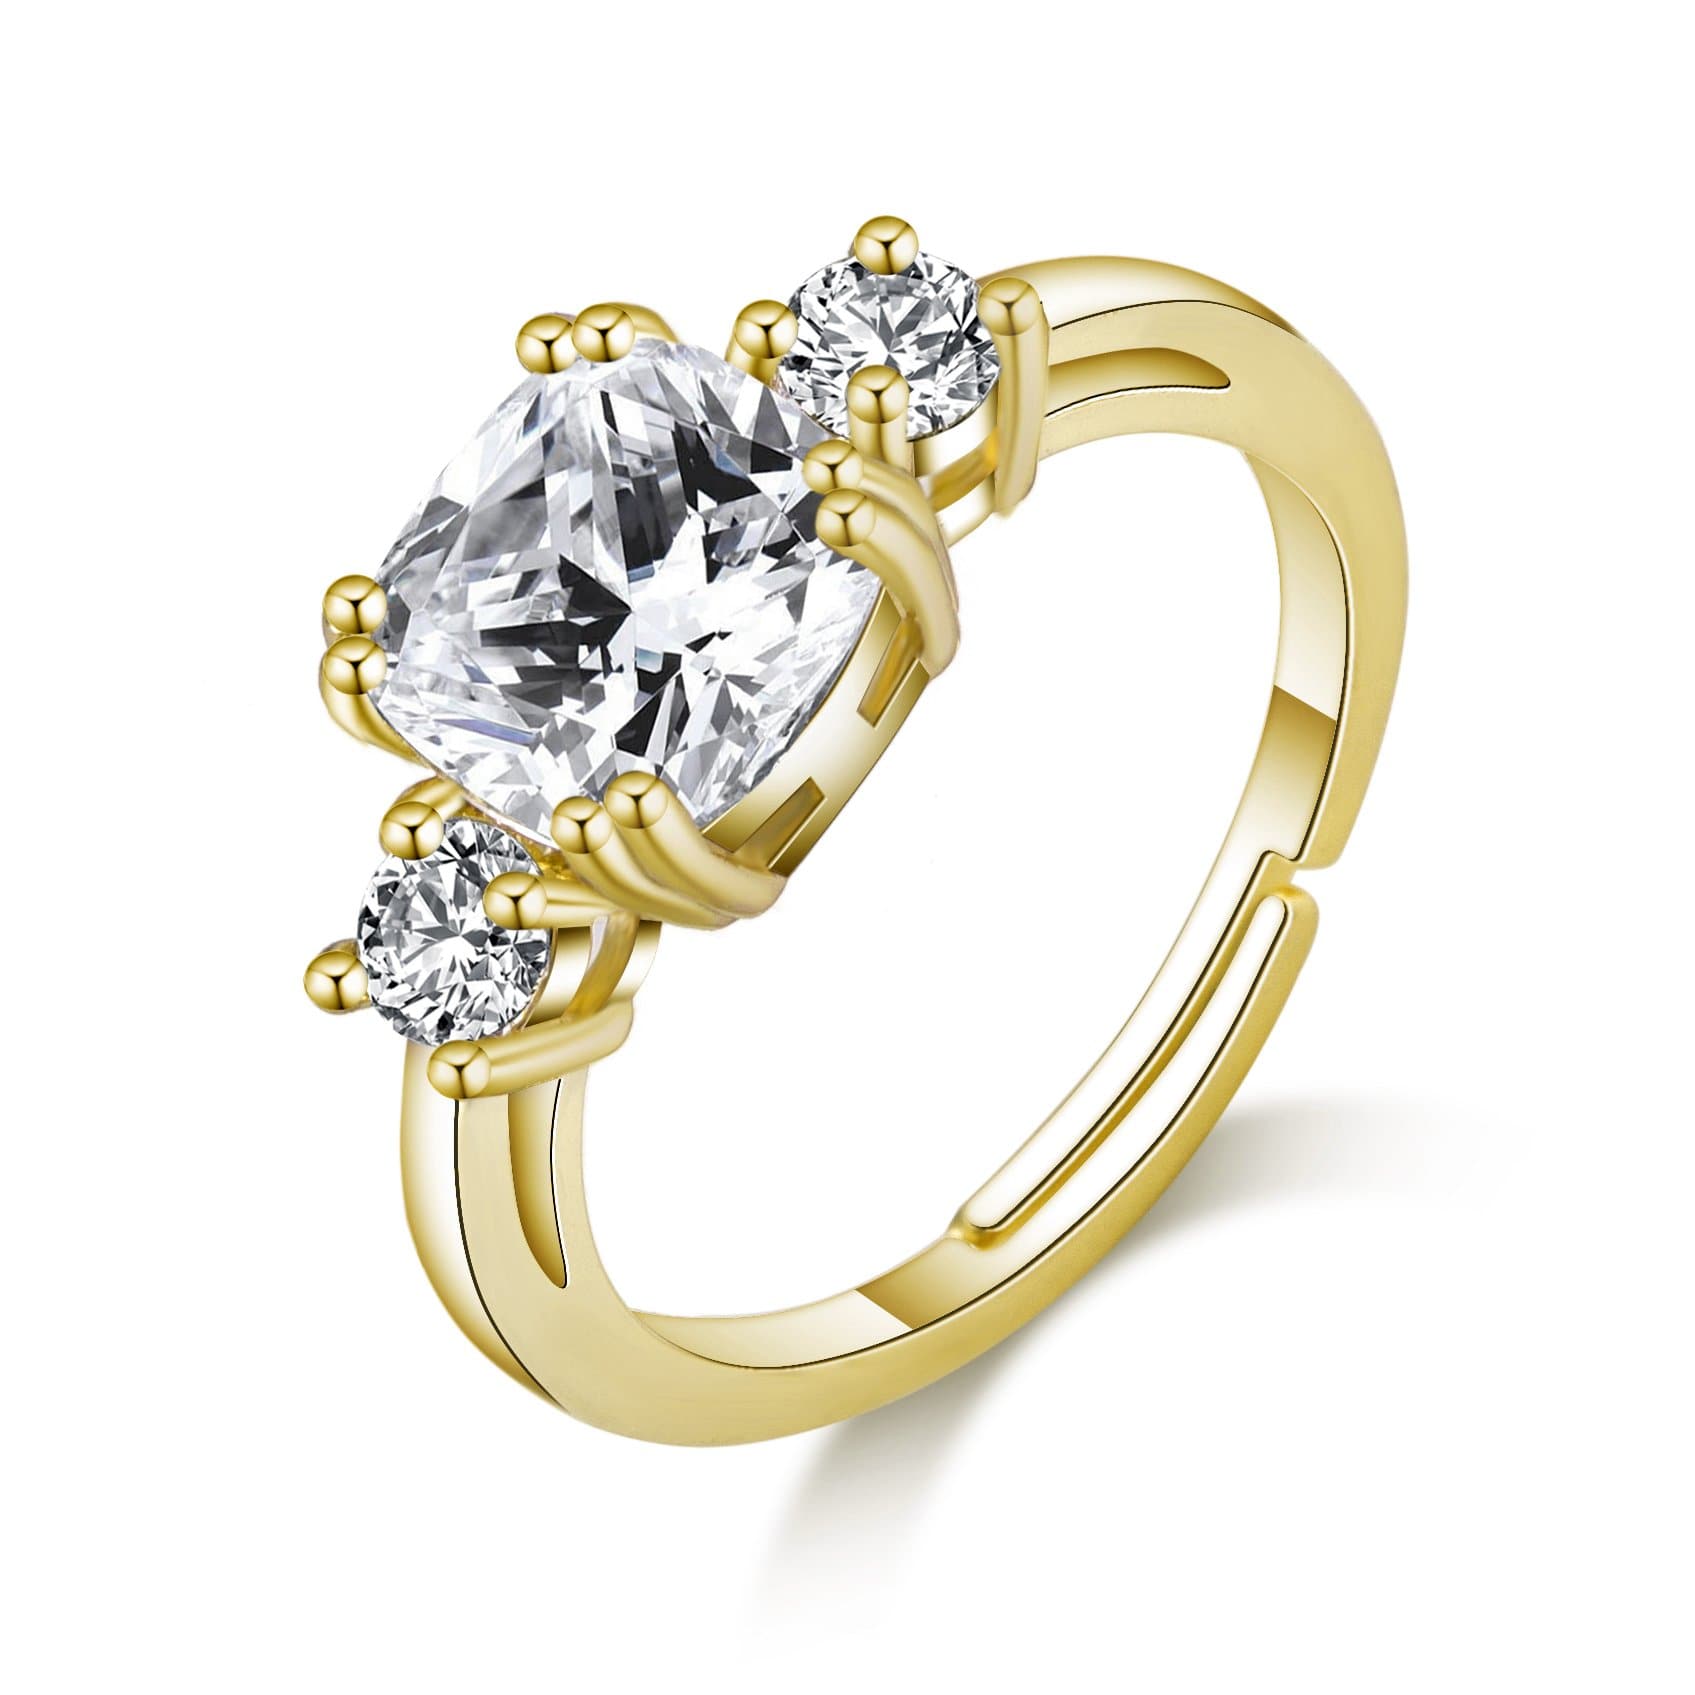 Gold Plated Adjustable Three Stone Ring Created with Zircondia® Crystals by Philip Jones Jewellery